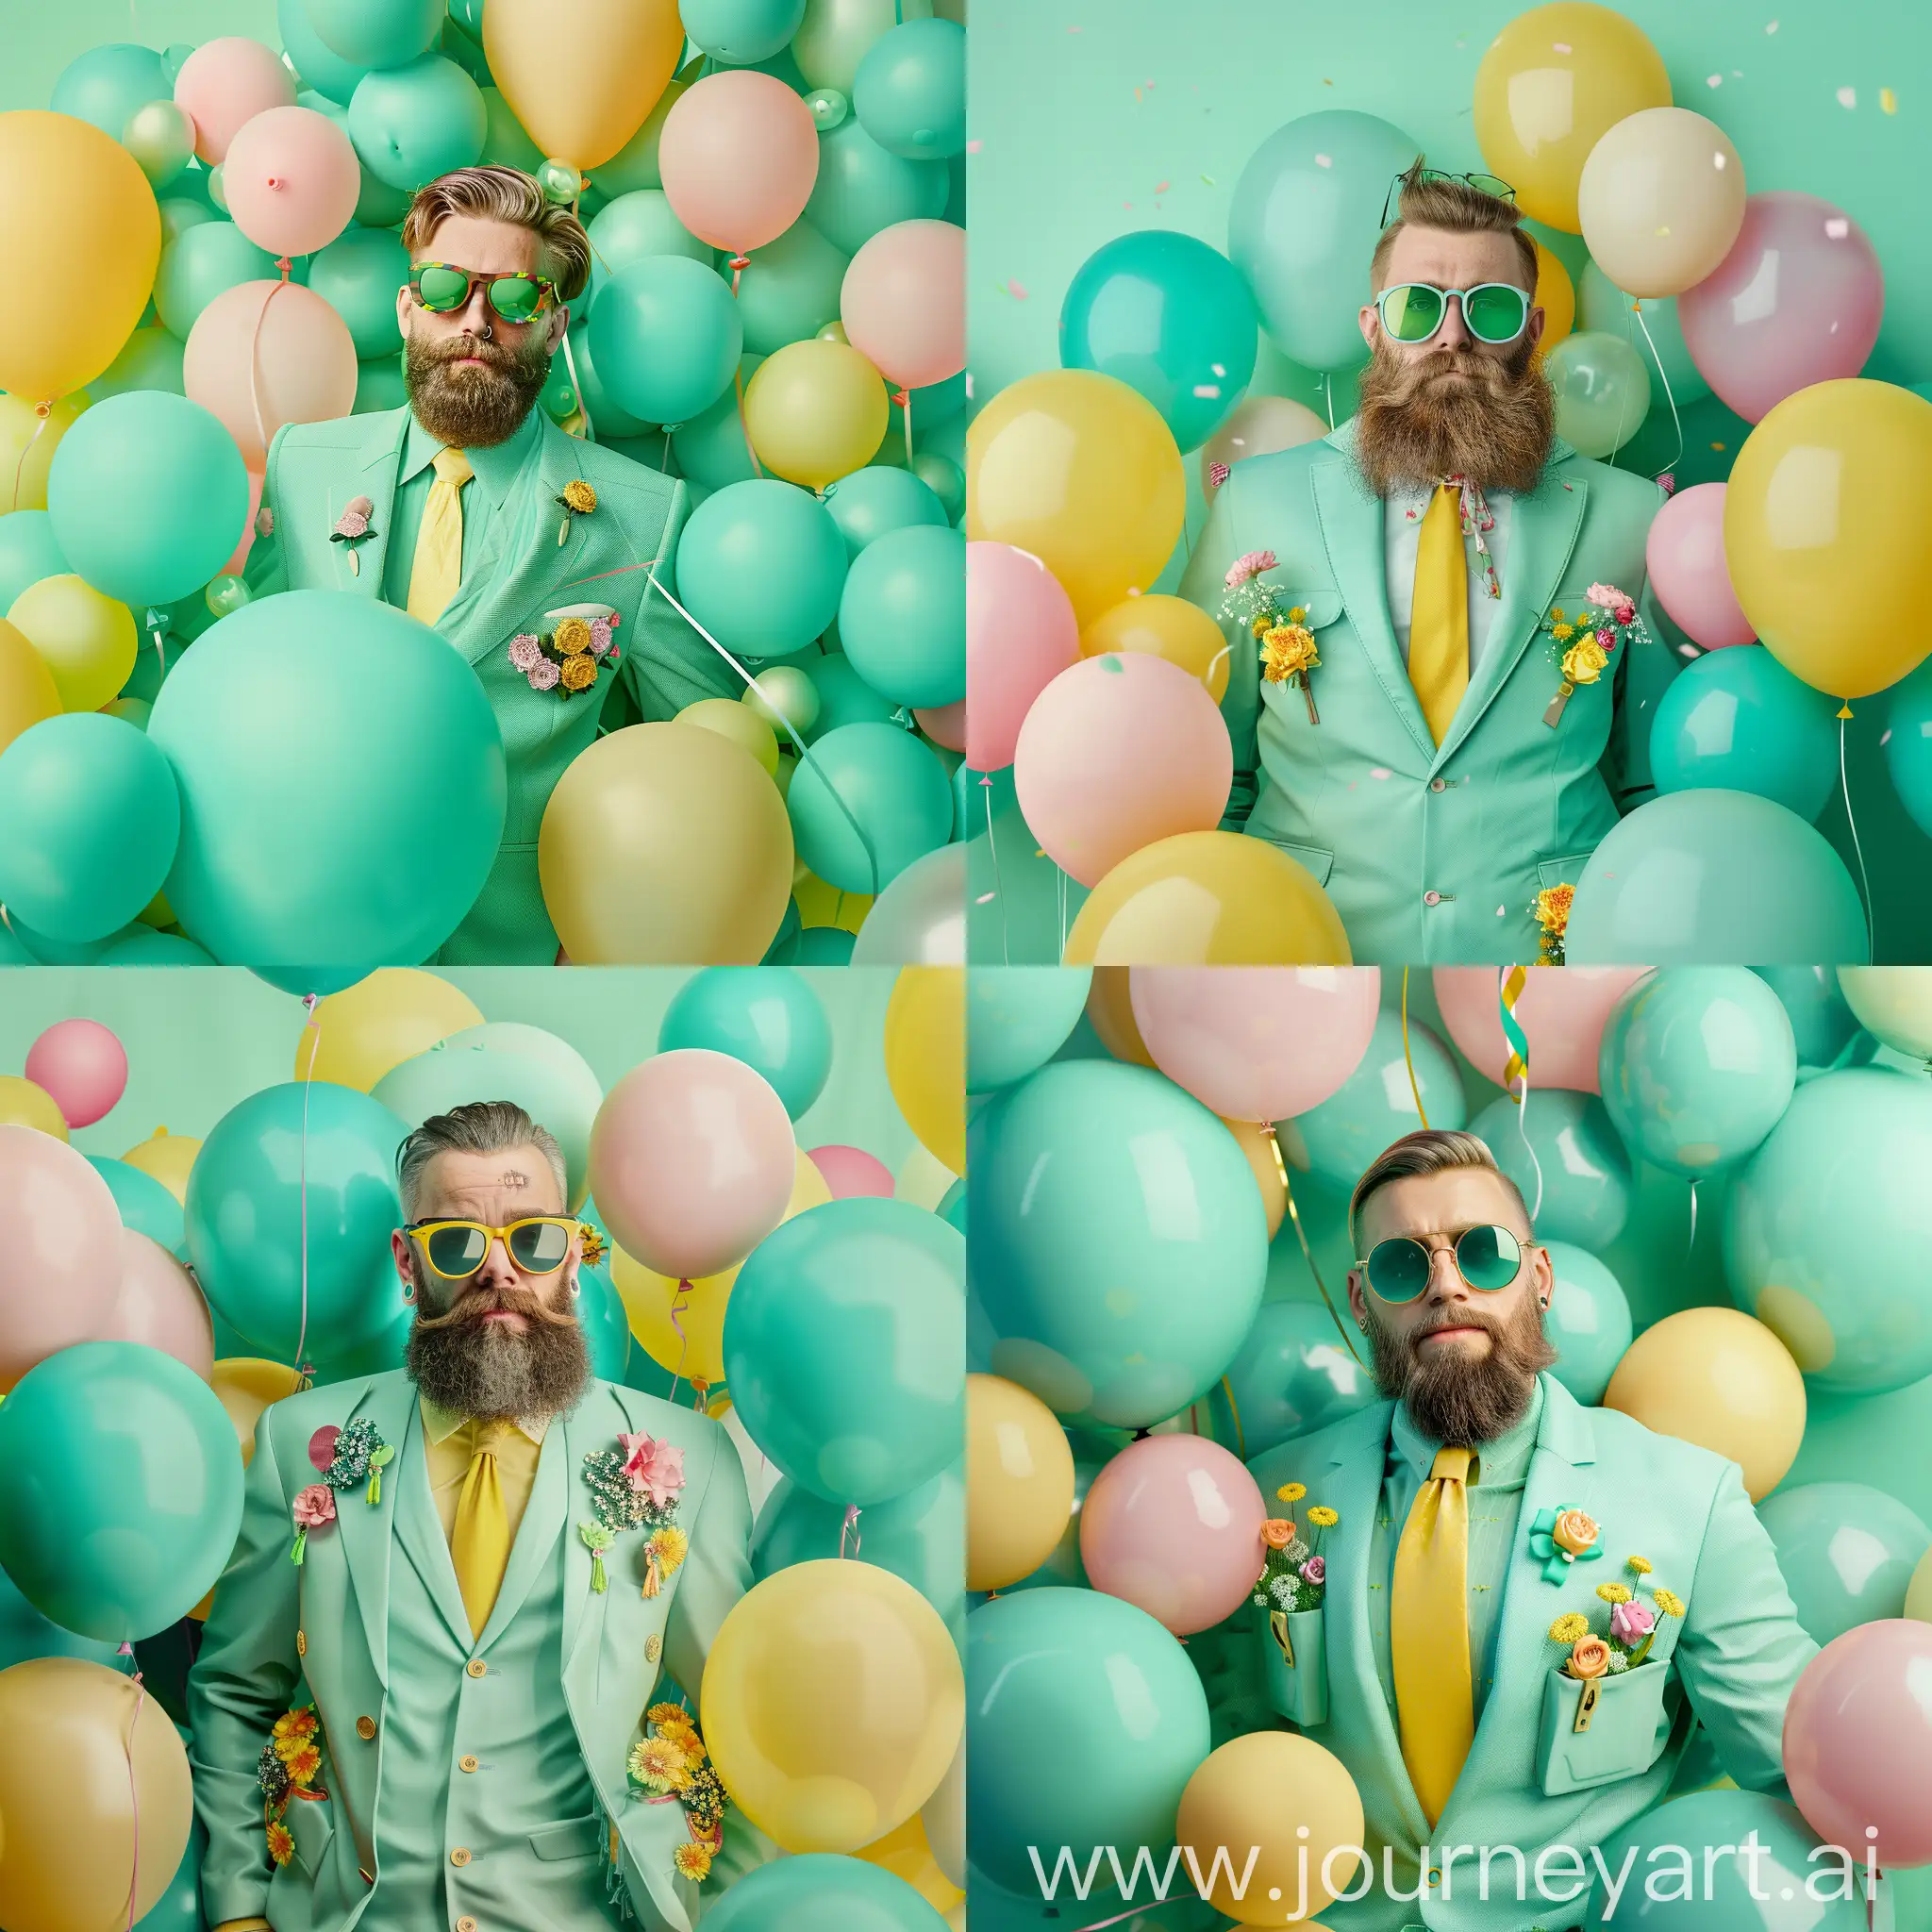 Stylish-Russian-Hipster-Celebrating-in-Mint-Green-Party-Outfit-Amid-Teal-Pink-and-Yellow-Balloons